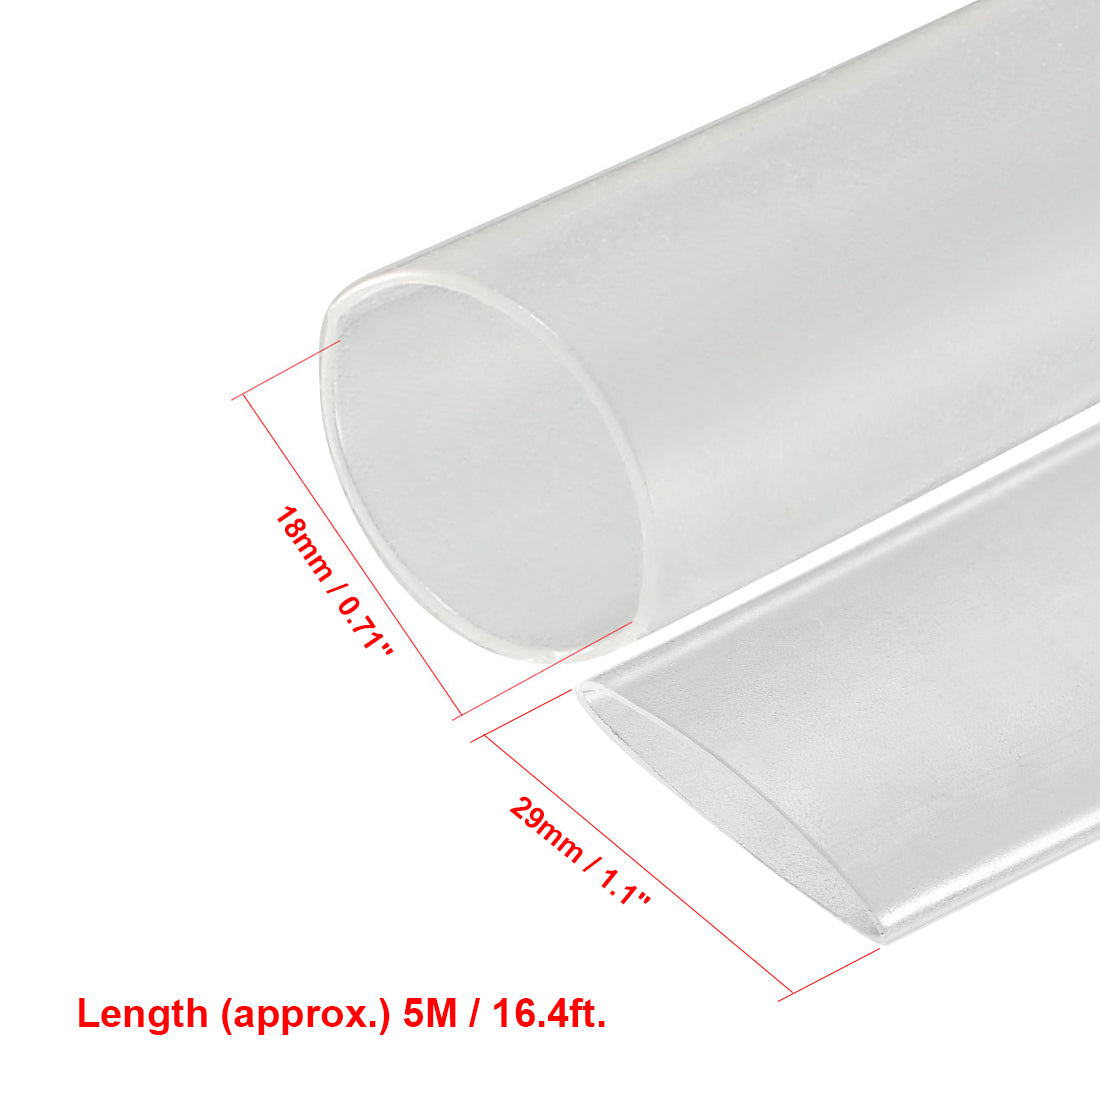 uxcell Uxcell Heat Shrink Tube 2:1 Electrical Insulation Tube Wire Cable Tubing Sleeving Wrap Transparent 18mm Diameter 5m Long